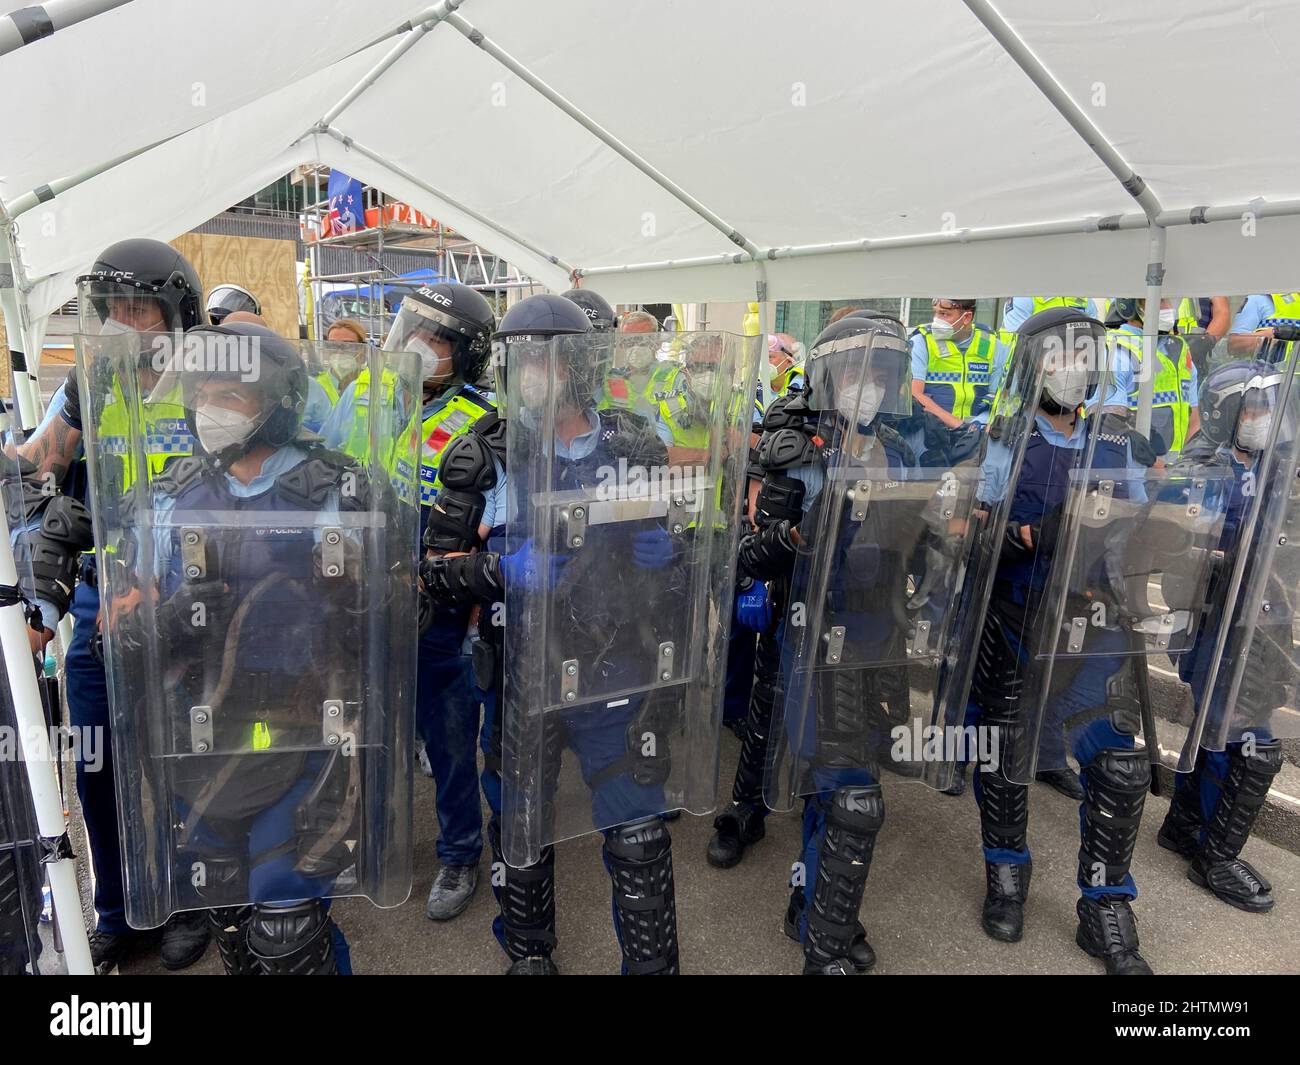 Police stand guard as protesters against the coronavirus disease (COVID-19) restrictions and vaccine mandates gather in front of the parliament in Wellington, New Zealand, March 2, 2022,. REUTERS/Praveen Menon Stock Photo